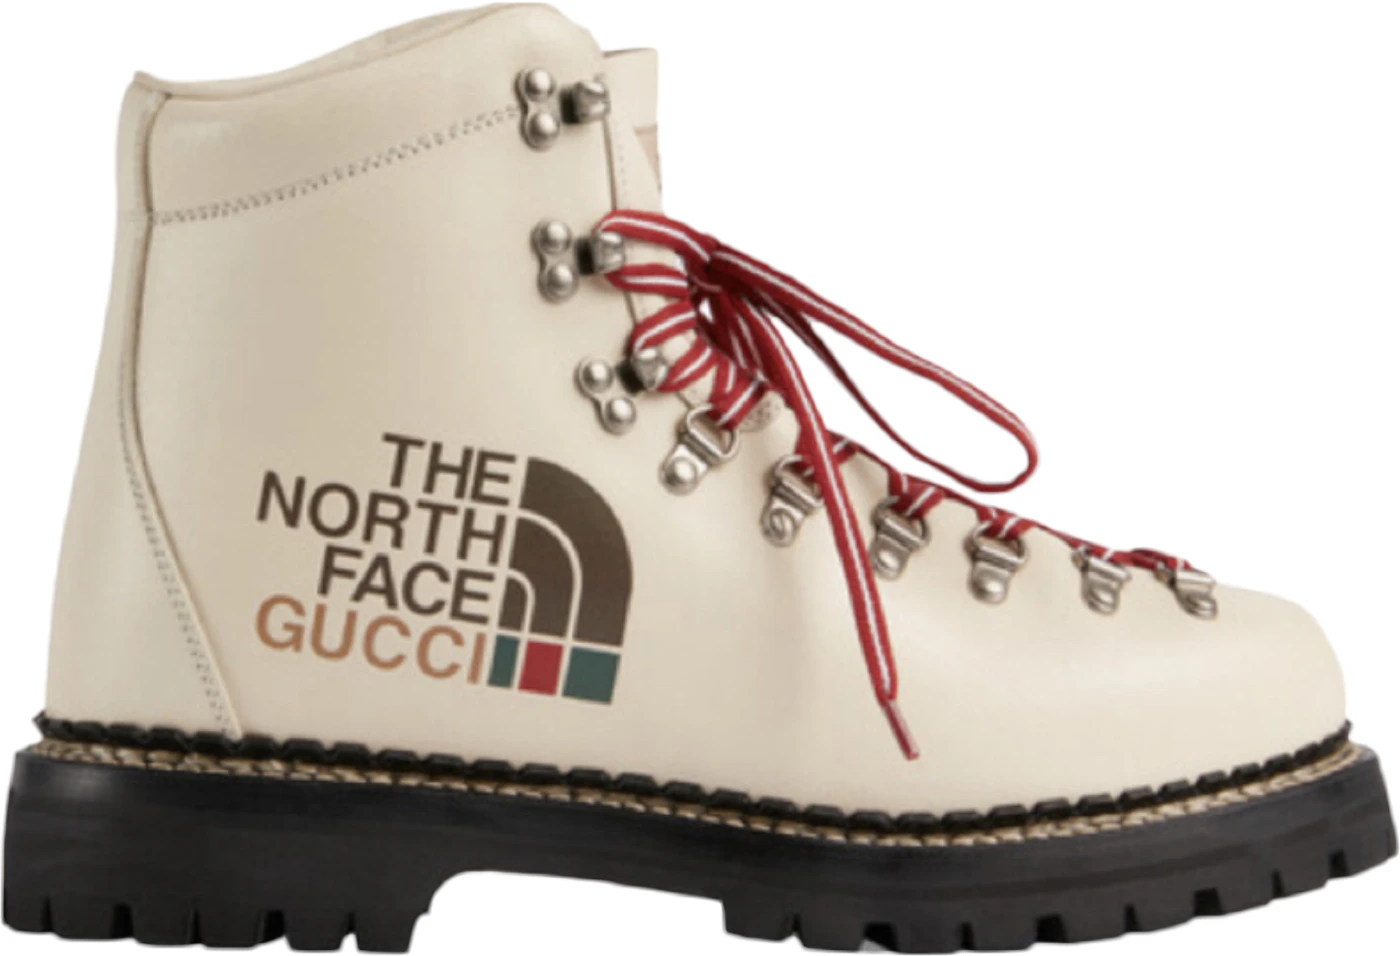 The North Face x Gucci - Authenticated Boots - Leather White Plain for Men, Very Good Condition